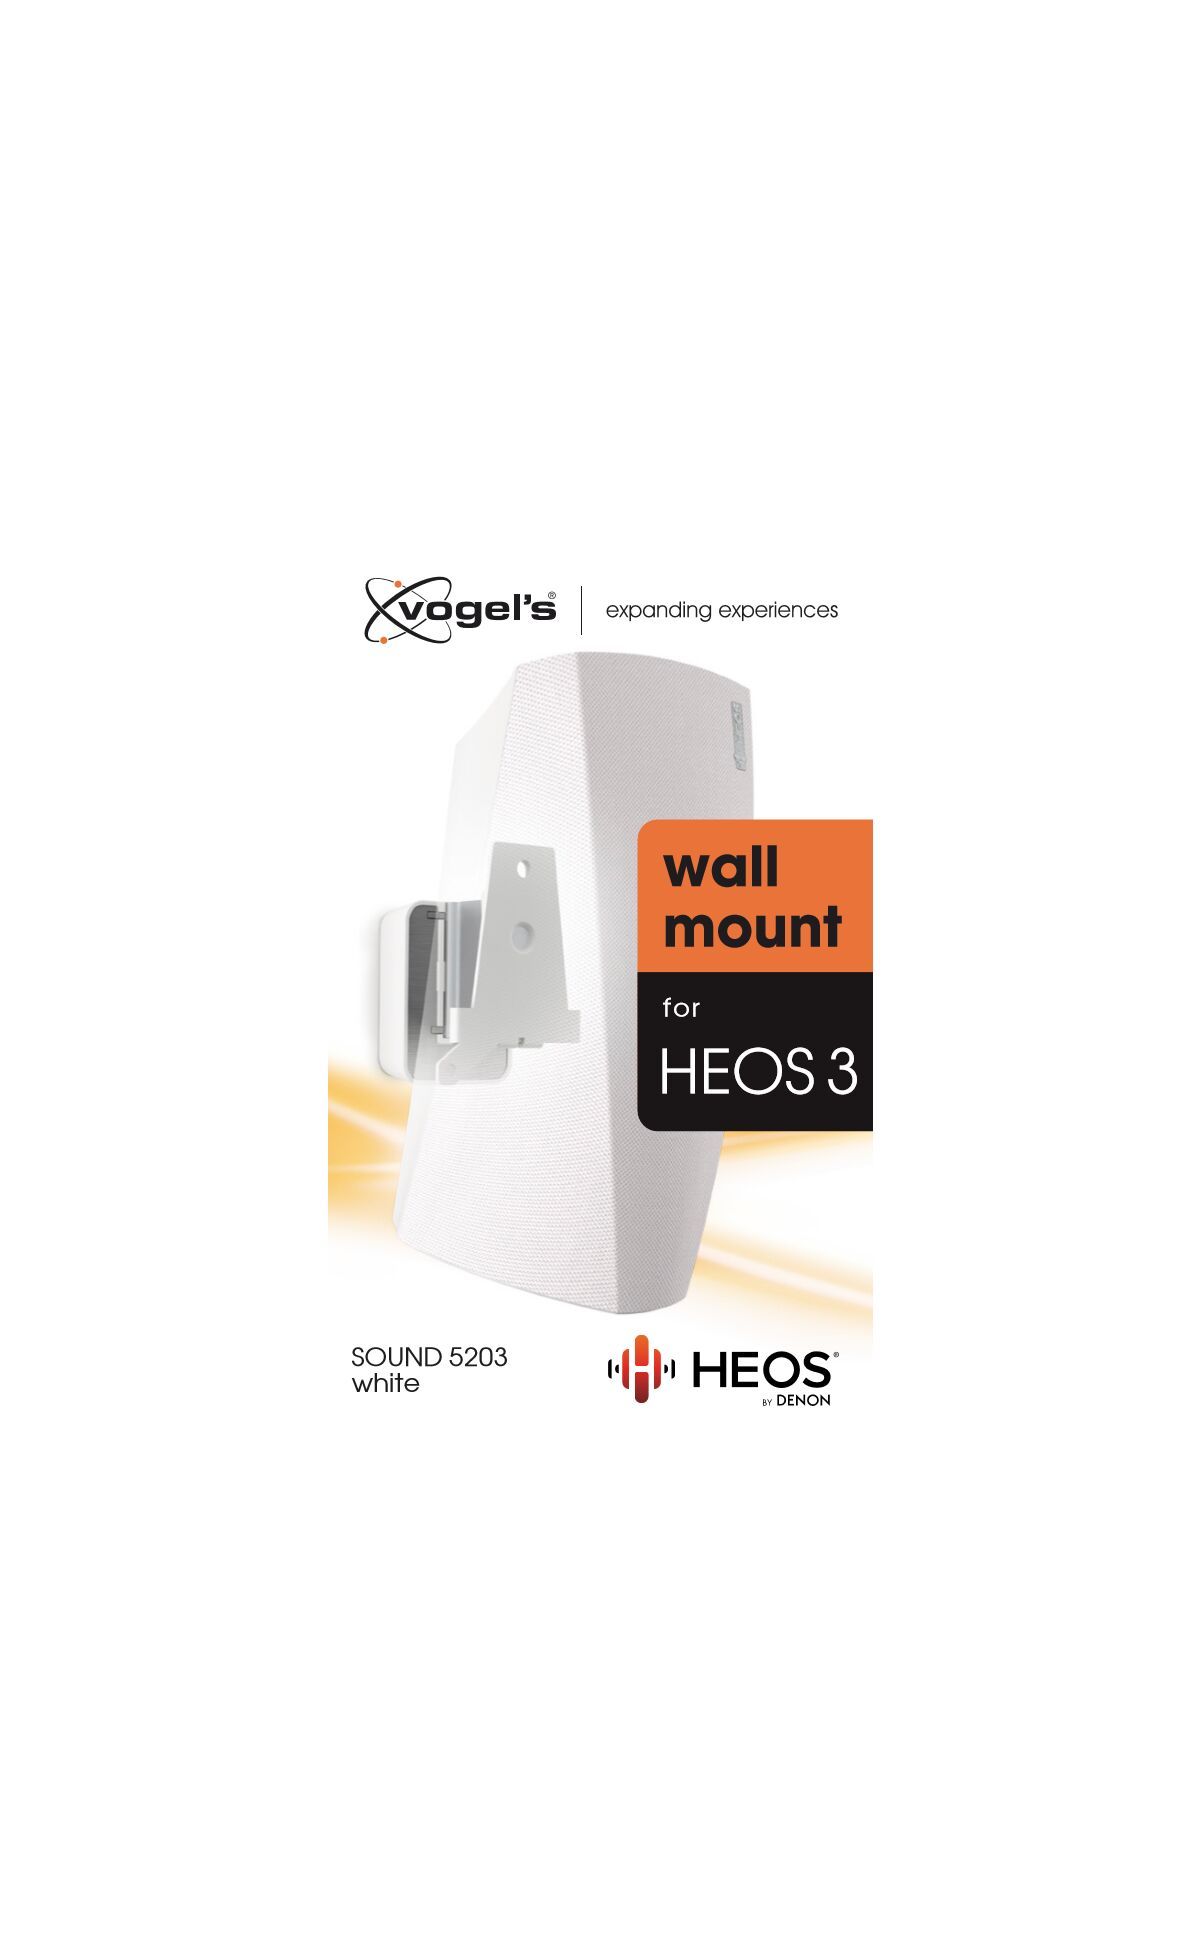 Vogel's SOUND 5203 Speaker Wall Mount for Denon HEOS 3 (white) - Packaging front